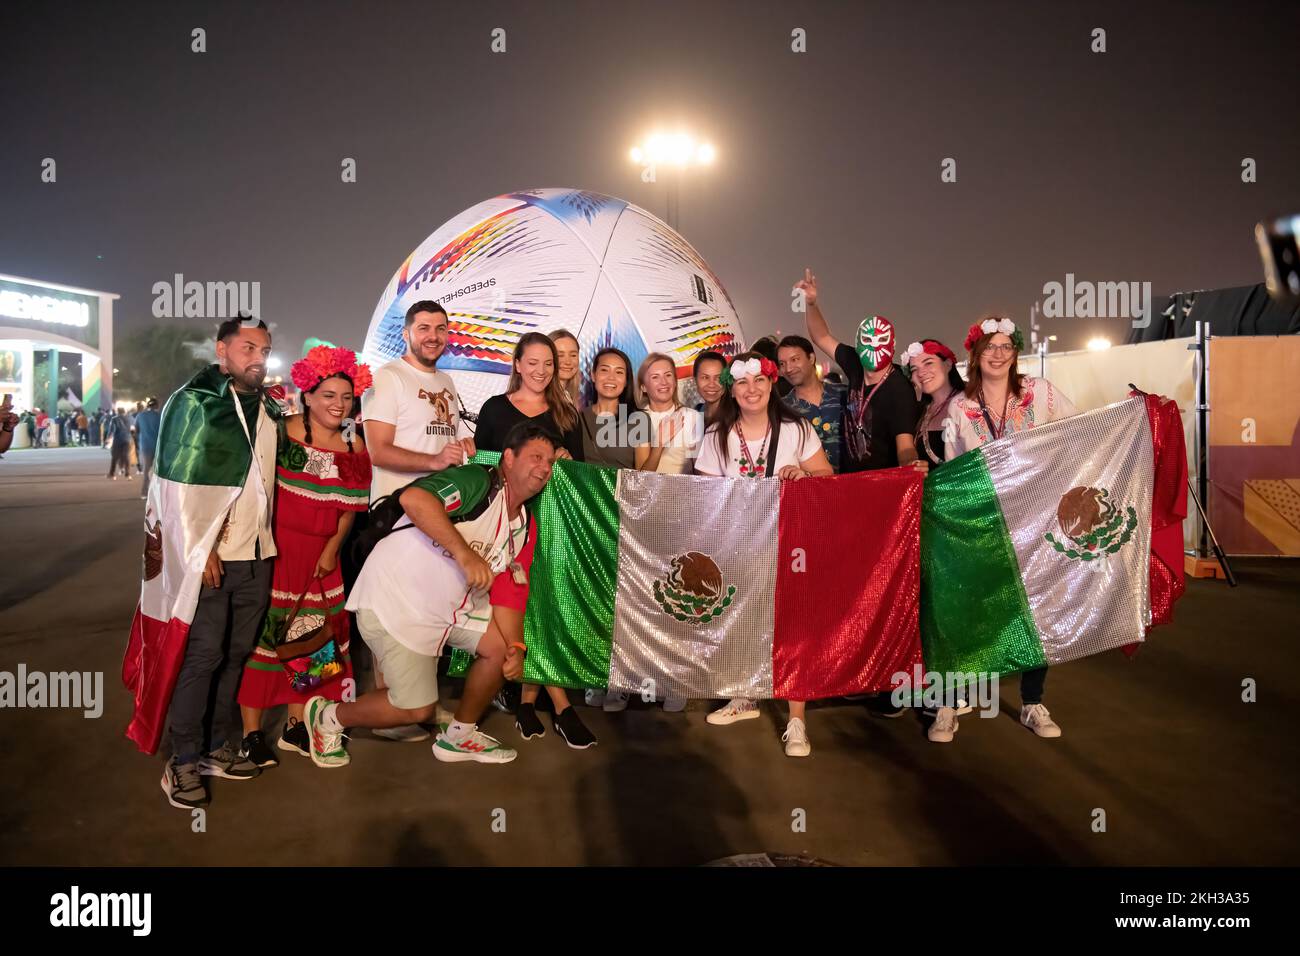 Soccer fans celebrating opening ceremony in Doha Fan Zone Qatar. Mexicans Football Fans in Qatar Stock Photo